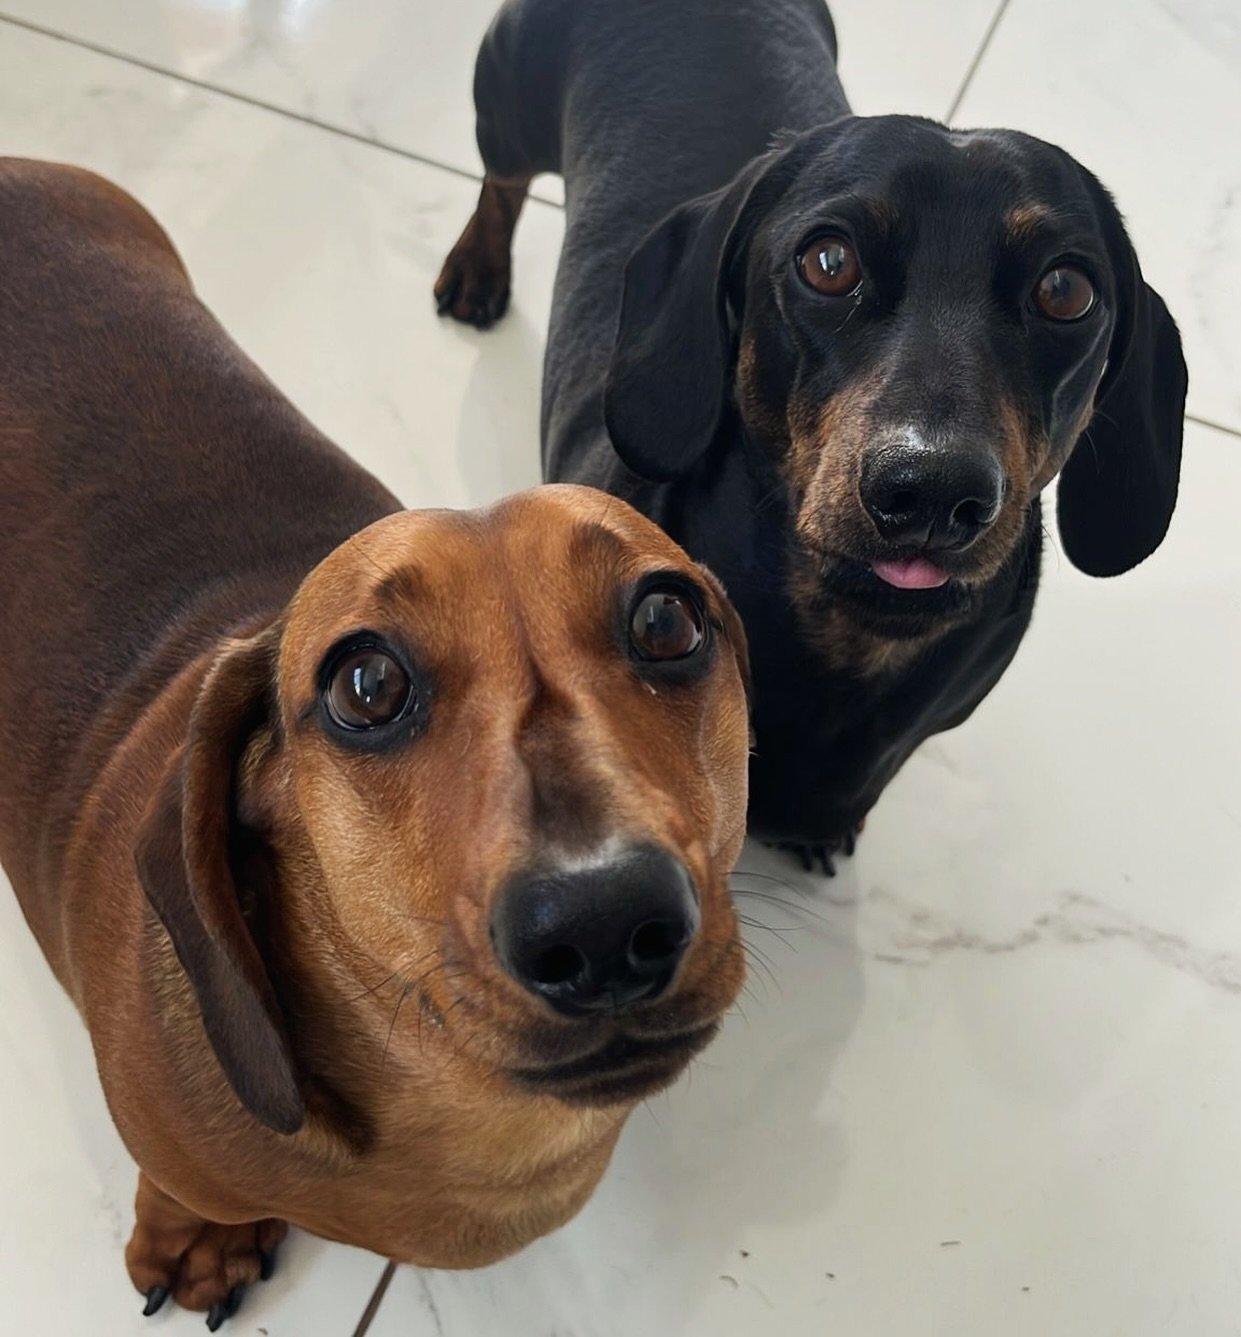 Everyone meet Loki &amp; Thor 😍 these two cheeky sausages have joined Kelly&rsquo;s pack in the Wirral! They are starting off slow with pop in&rsquo;s with the view to build this up to walks and eventually joining in on the pack walks! 🐶🐶